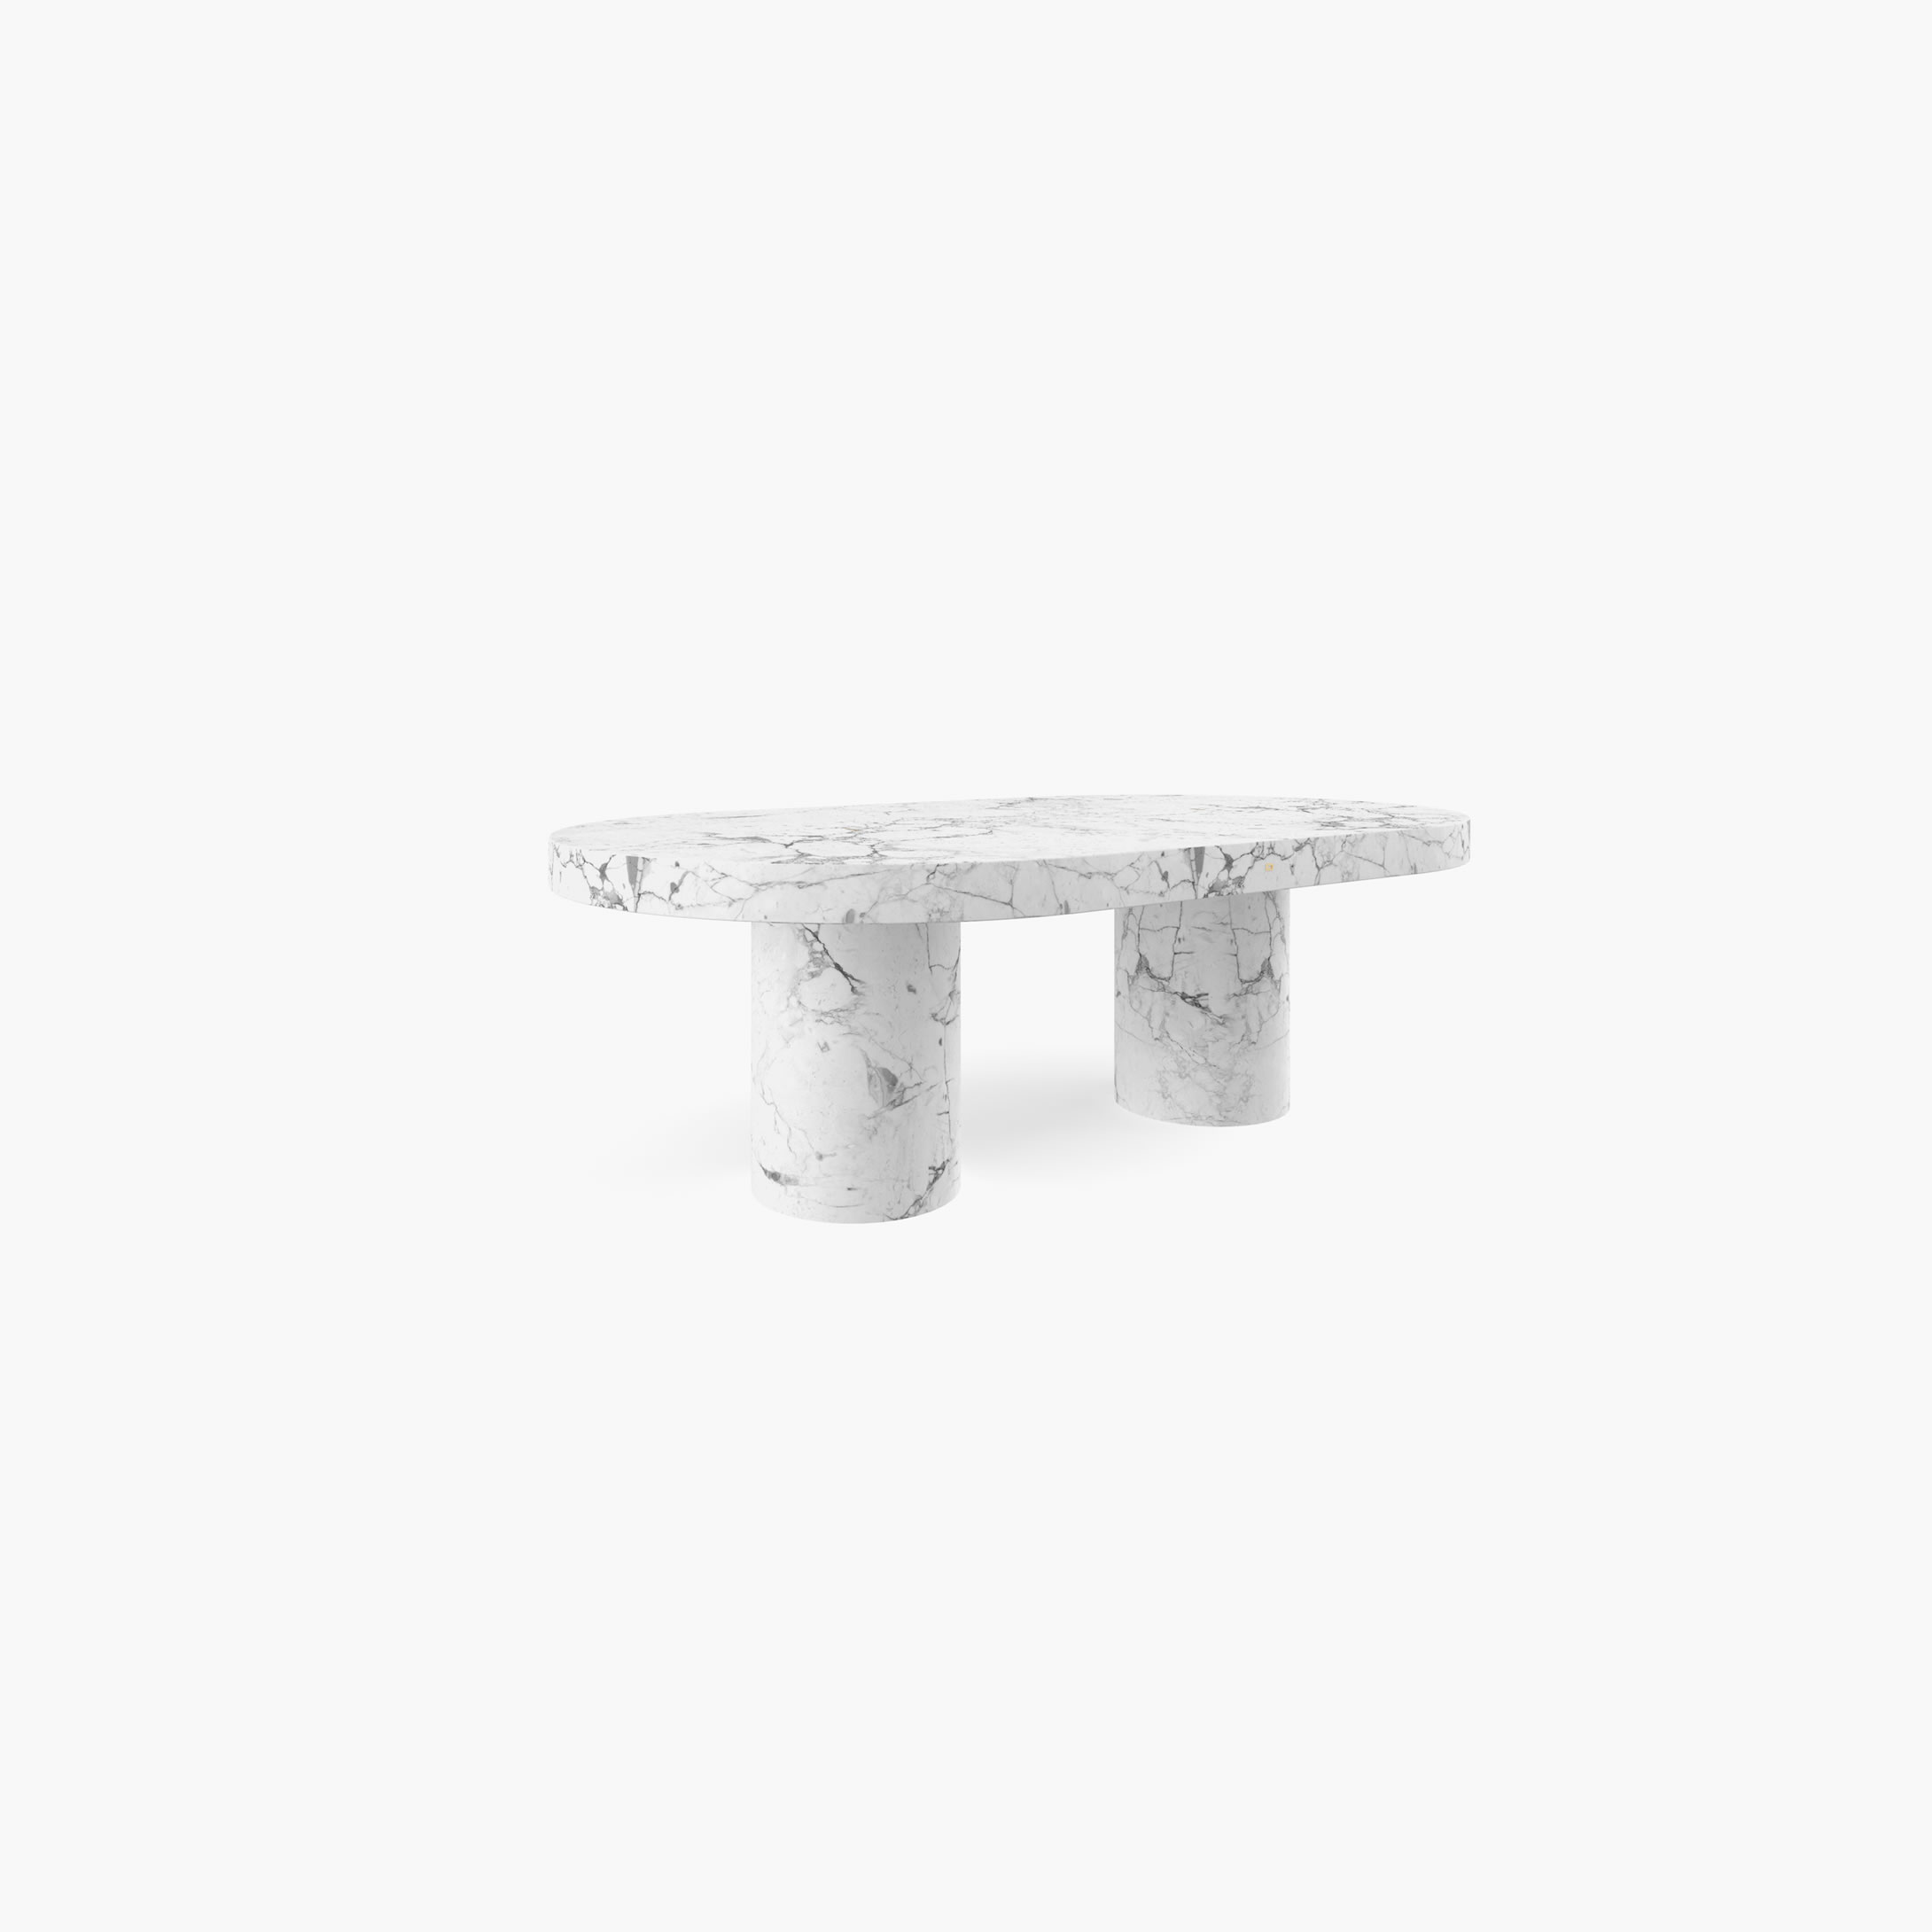 Dining Table Cylinder legs White Arabescato Marble high end Dining Room modern art Dining Tables FS 177 FELIX SCHWAKE